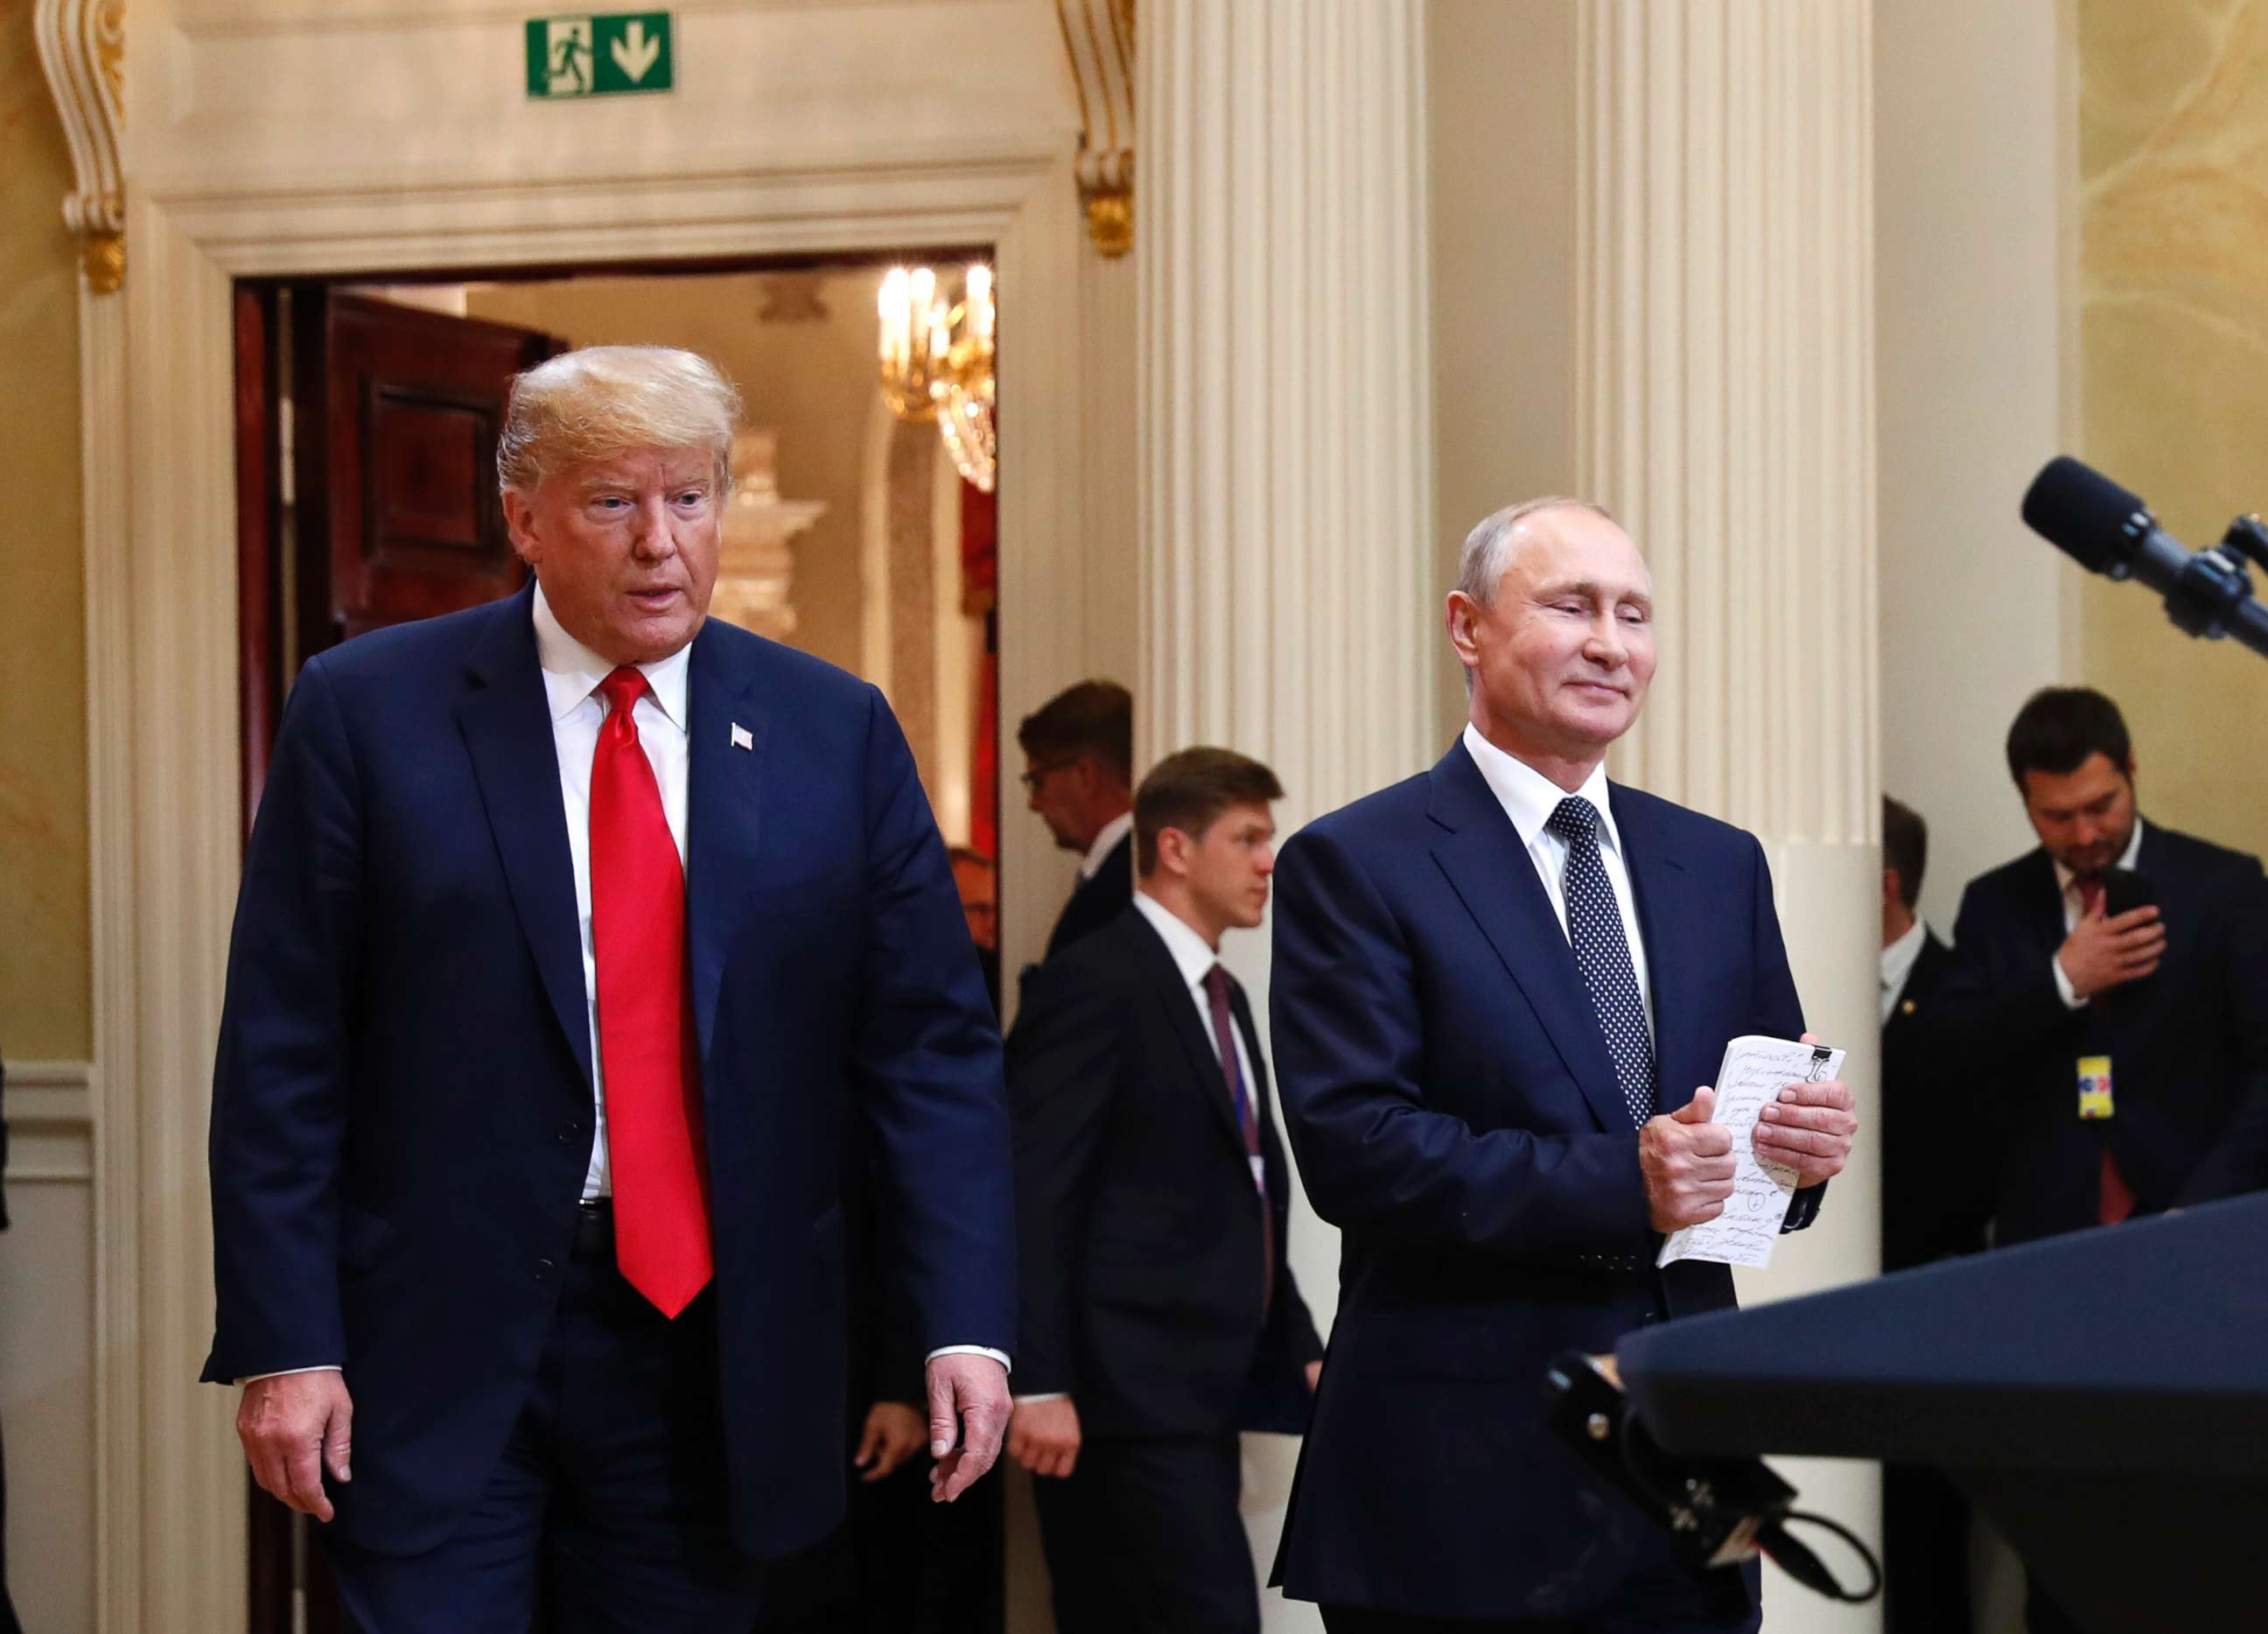 PHOTO: President Donald Trump and Russian President Vladimir Putin arrive for a press conference at the Presidential Palace in Helsinki, Finland, July 16, 2018.